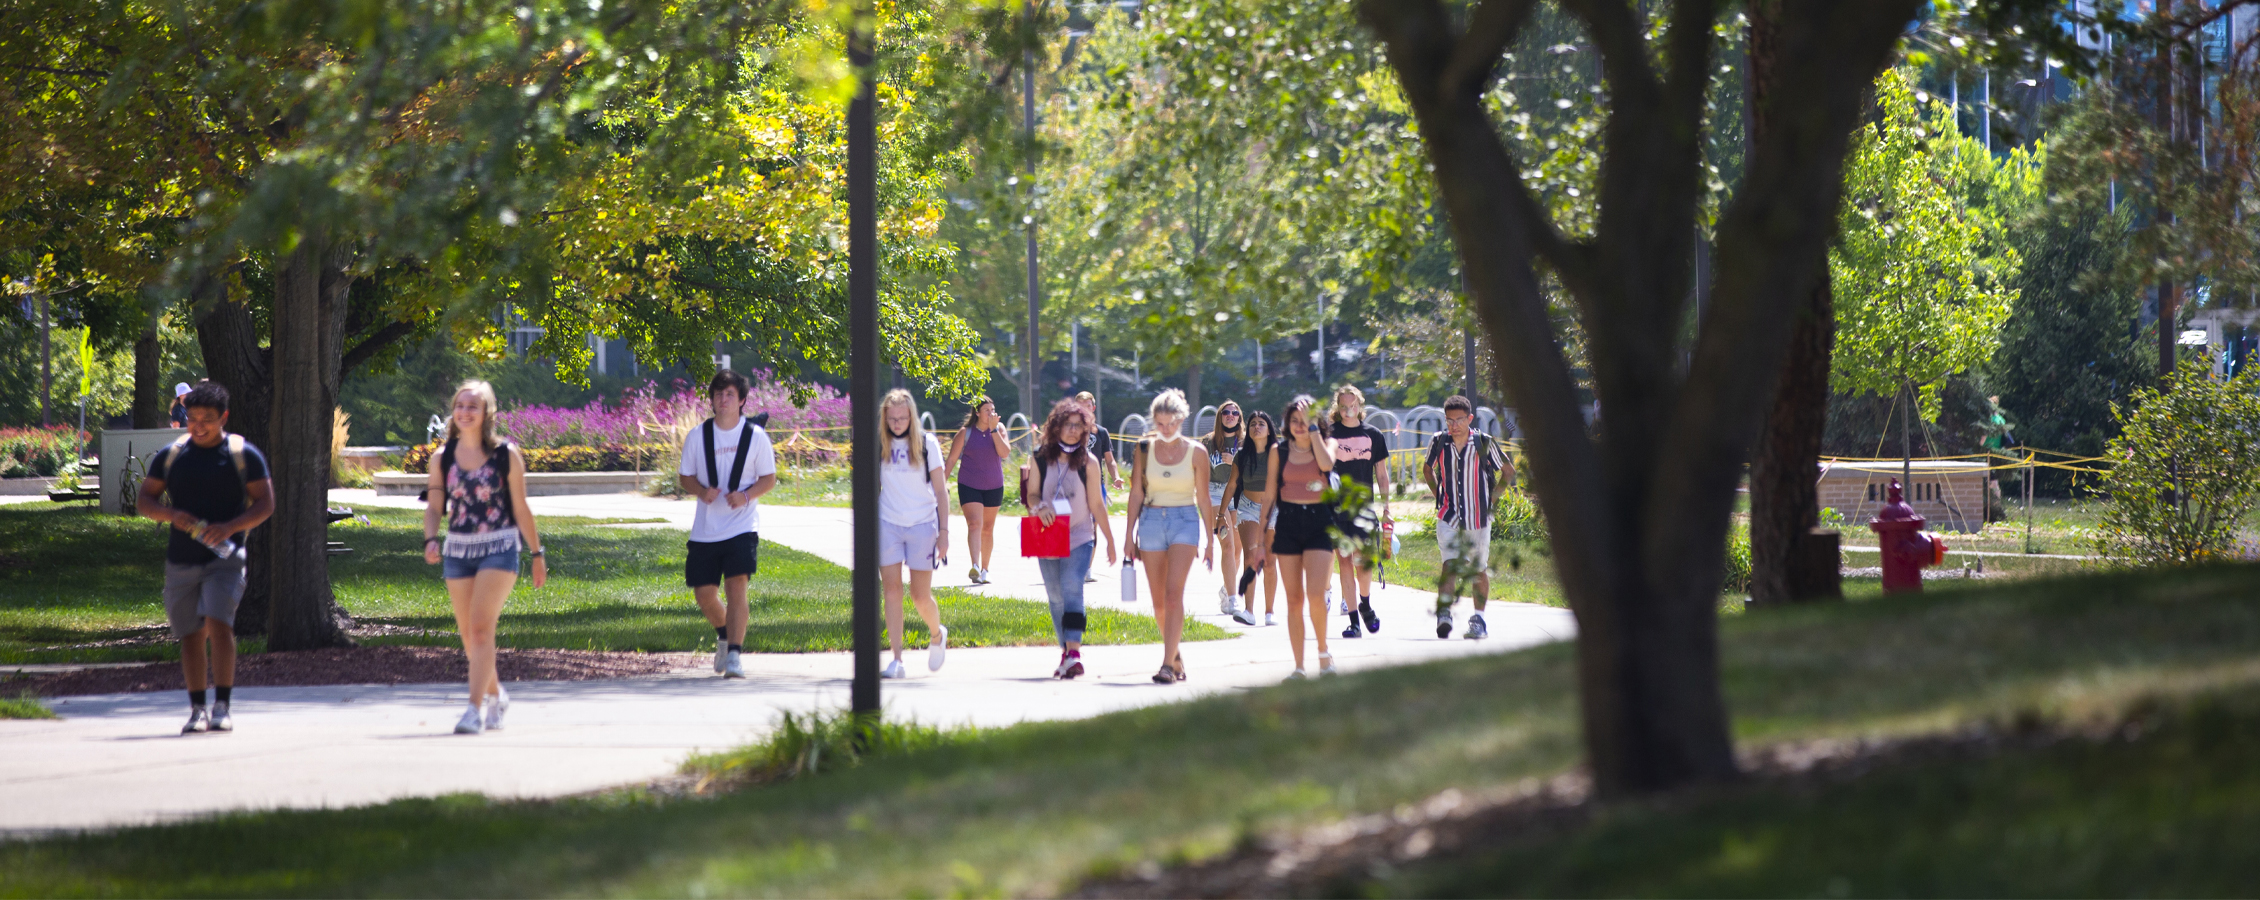 Students walk down a sidewalk lined with trees.